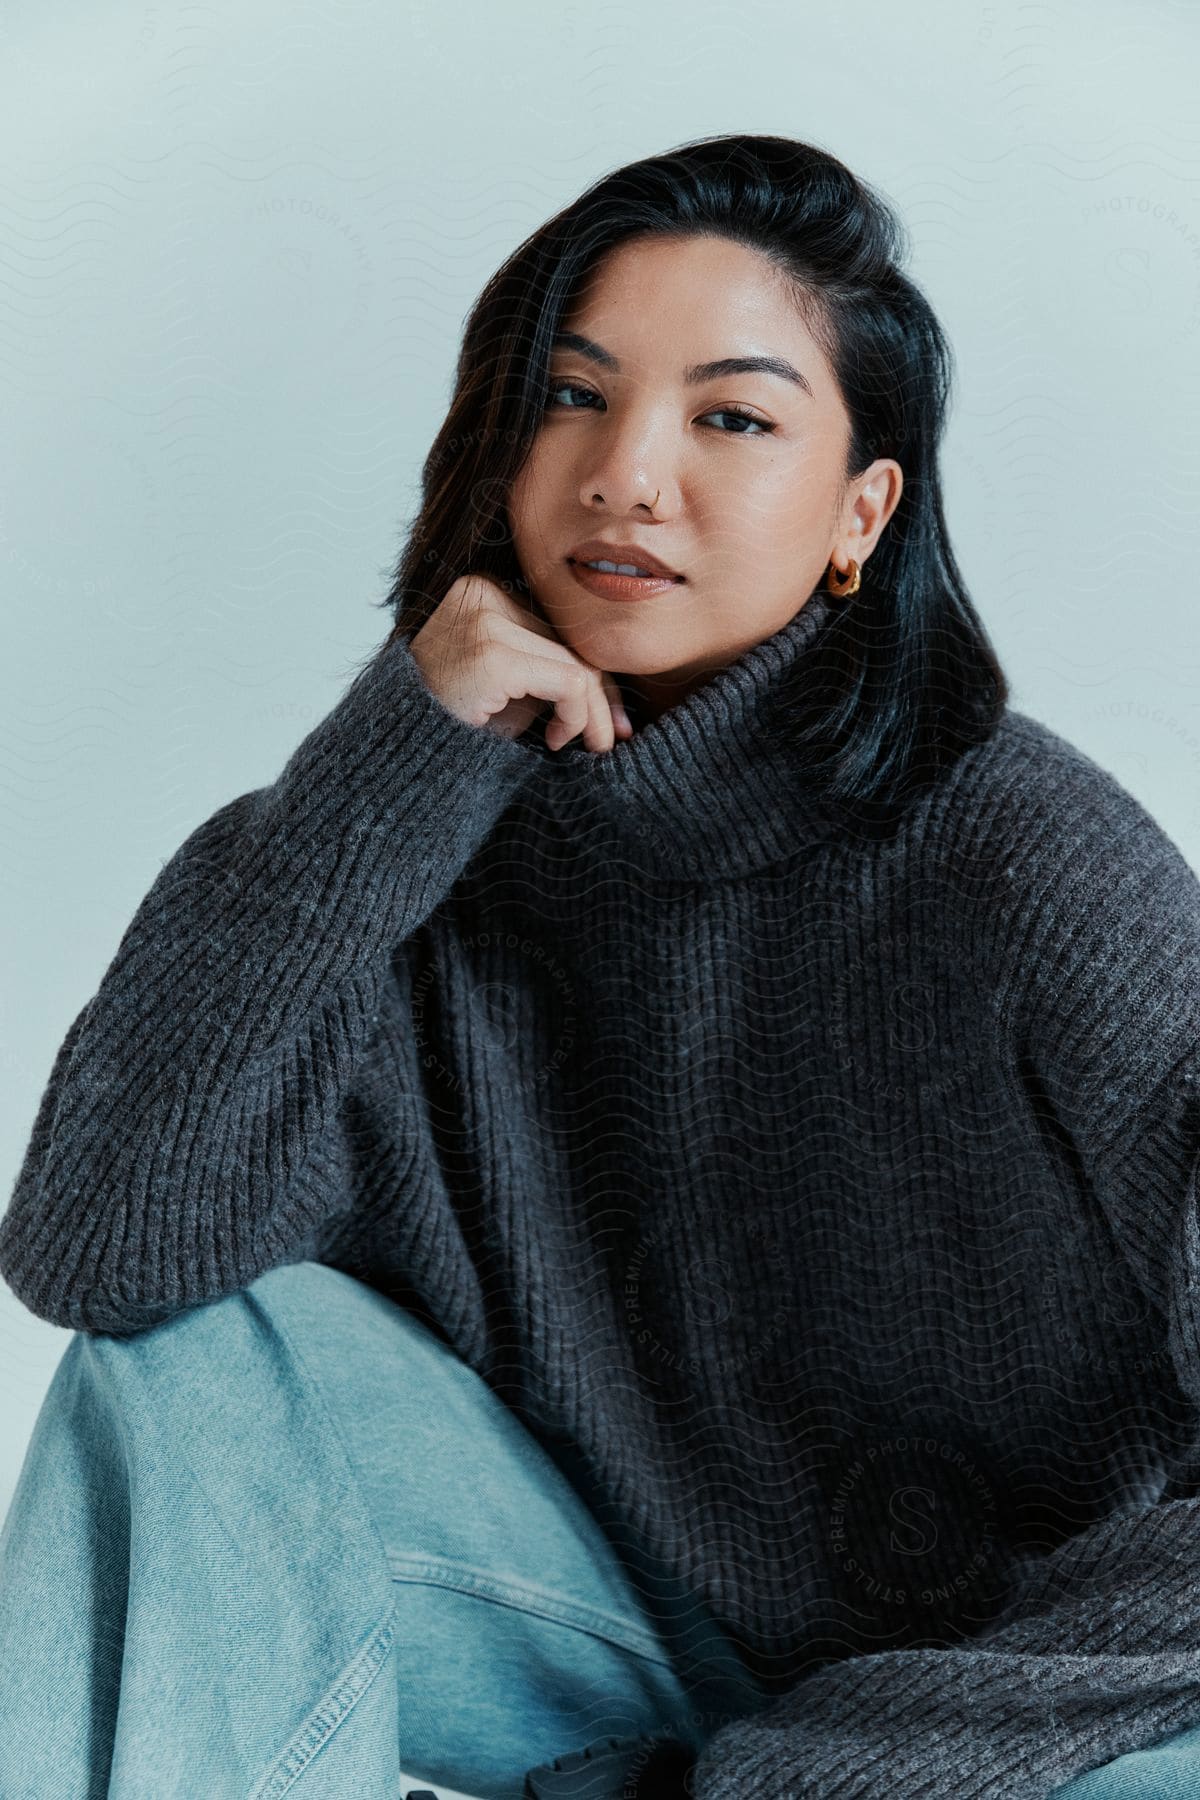 A woman is sitting wearing jeans and a gray sweater and her hand is holding her chin